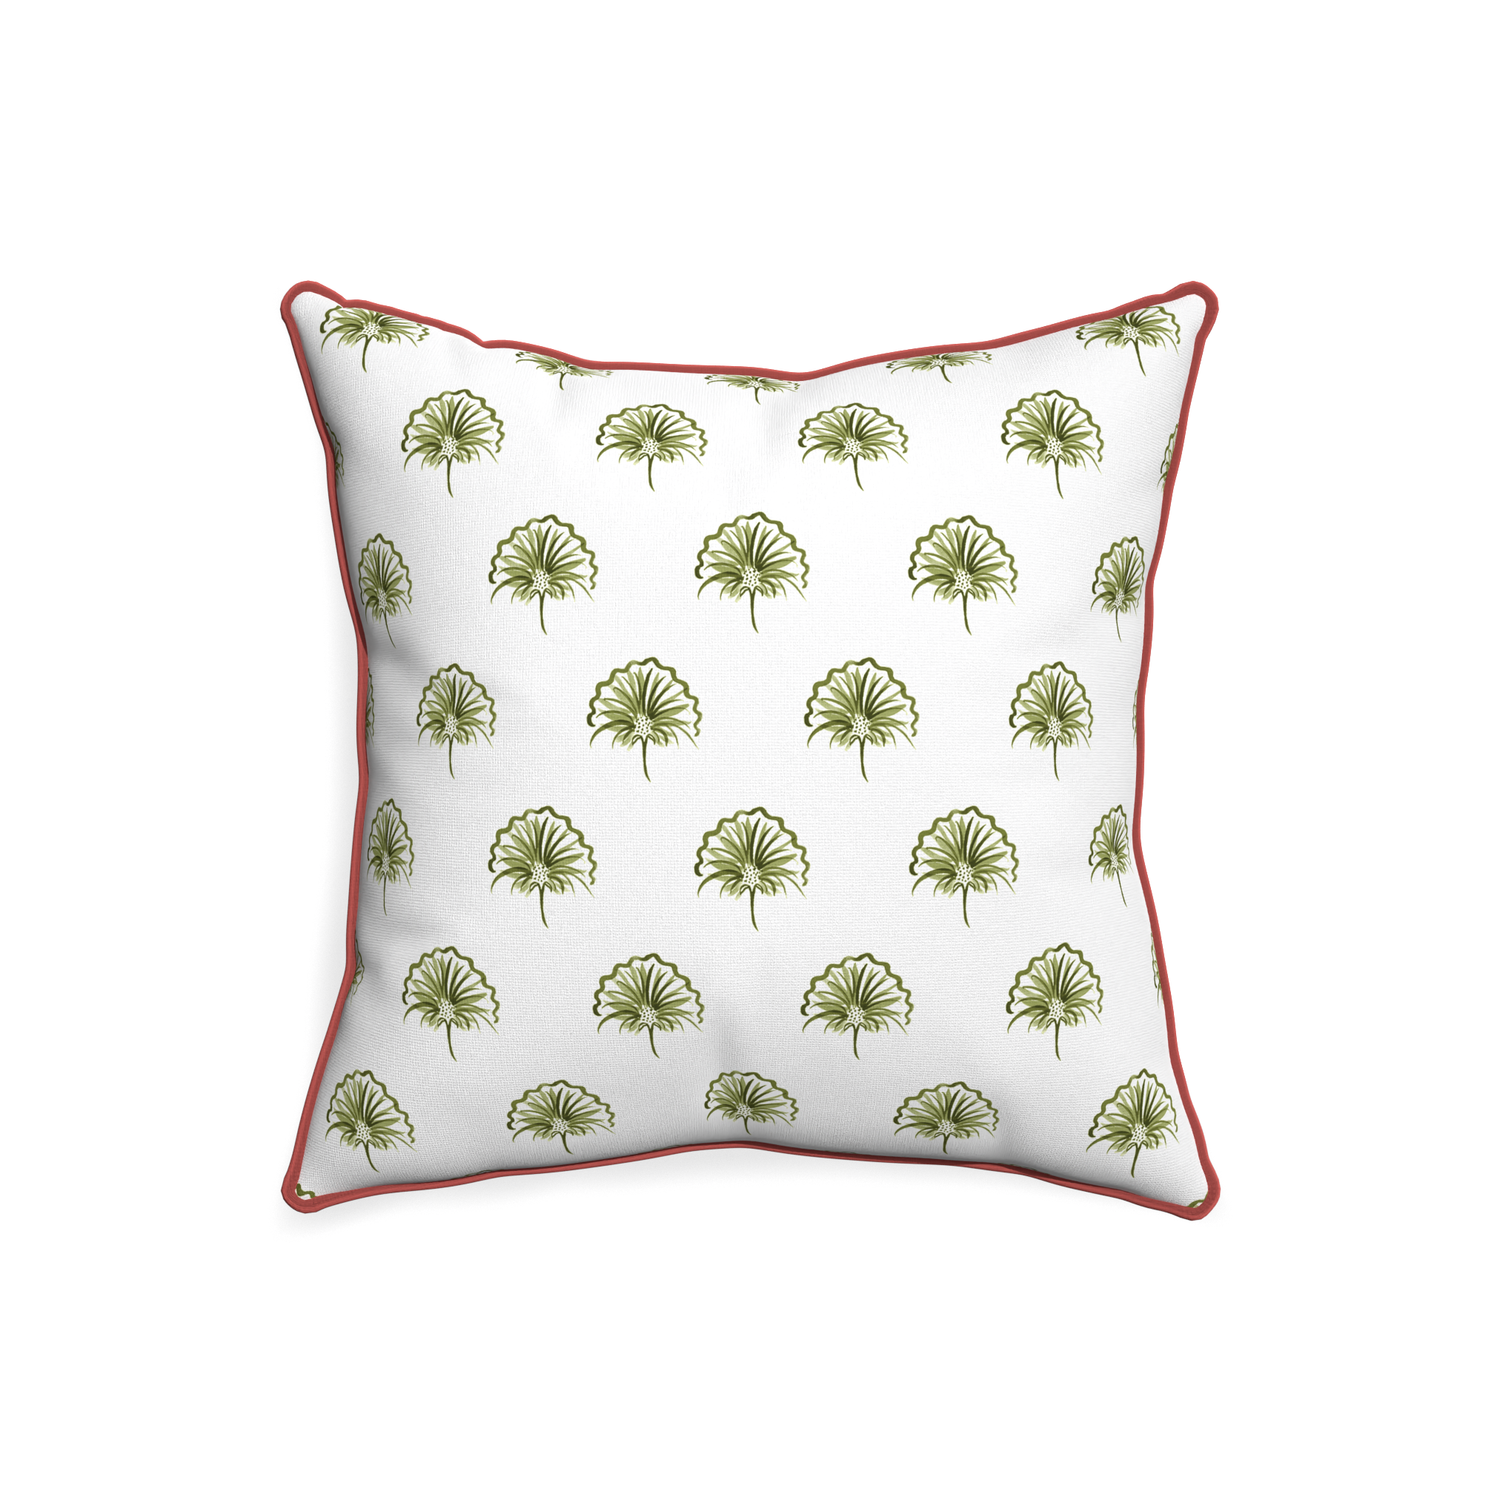 20-square penelope moss custom pillow with c piping on white background